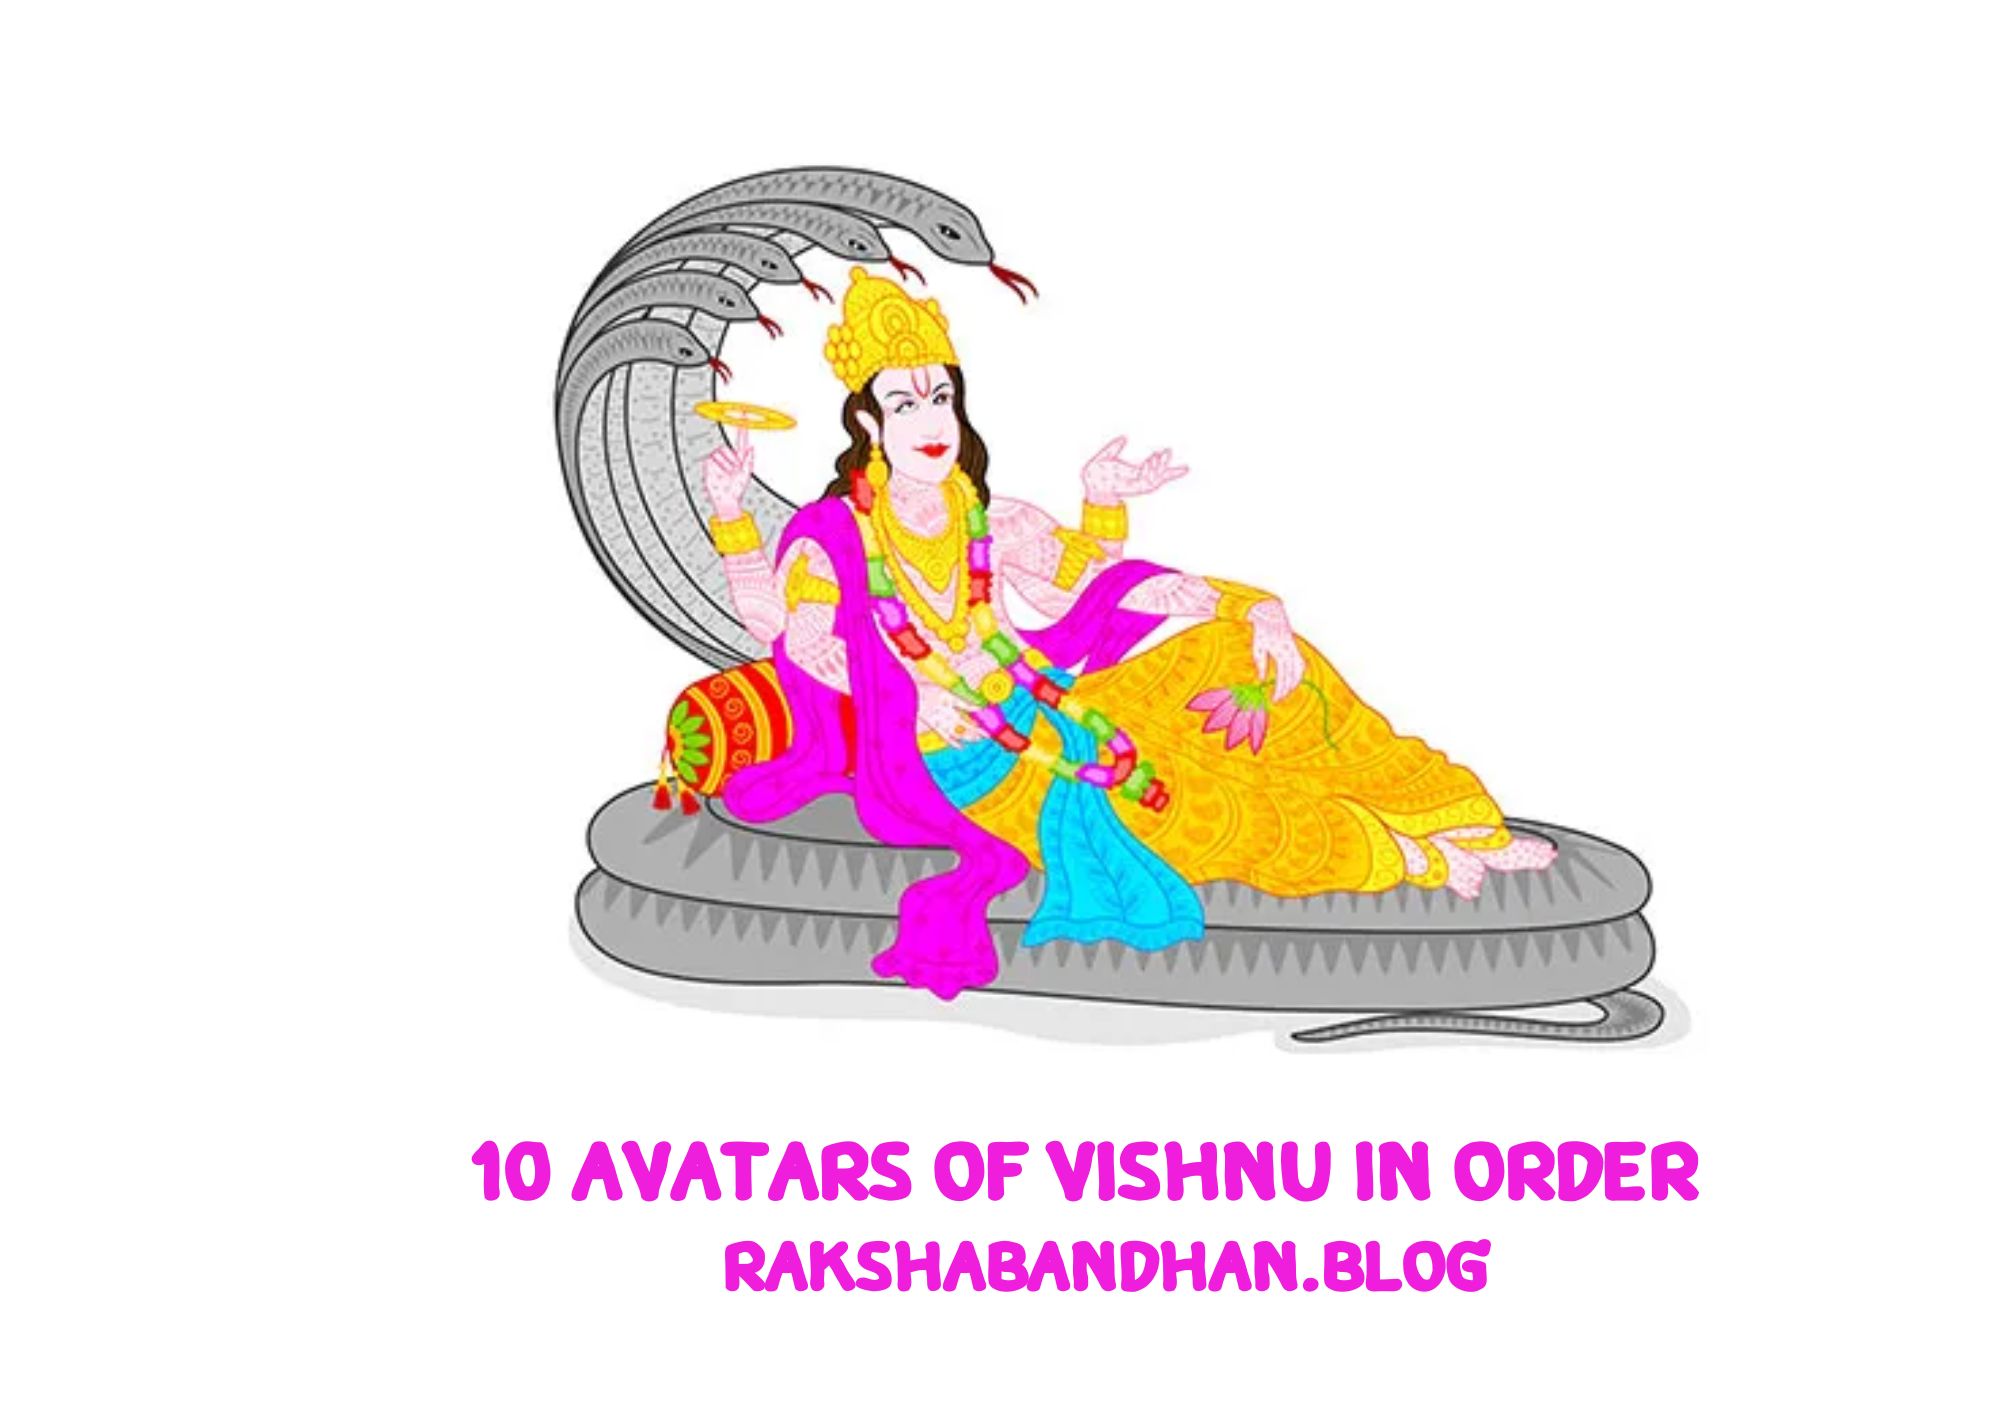 10 Avatars Of Vishnu In Order With Pictures (10 Avatars Of Lord Vishnu In Order) - 10 Avatar Of Lord Vishnu Names